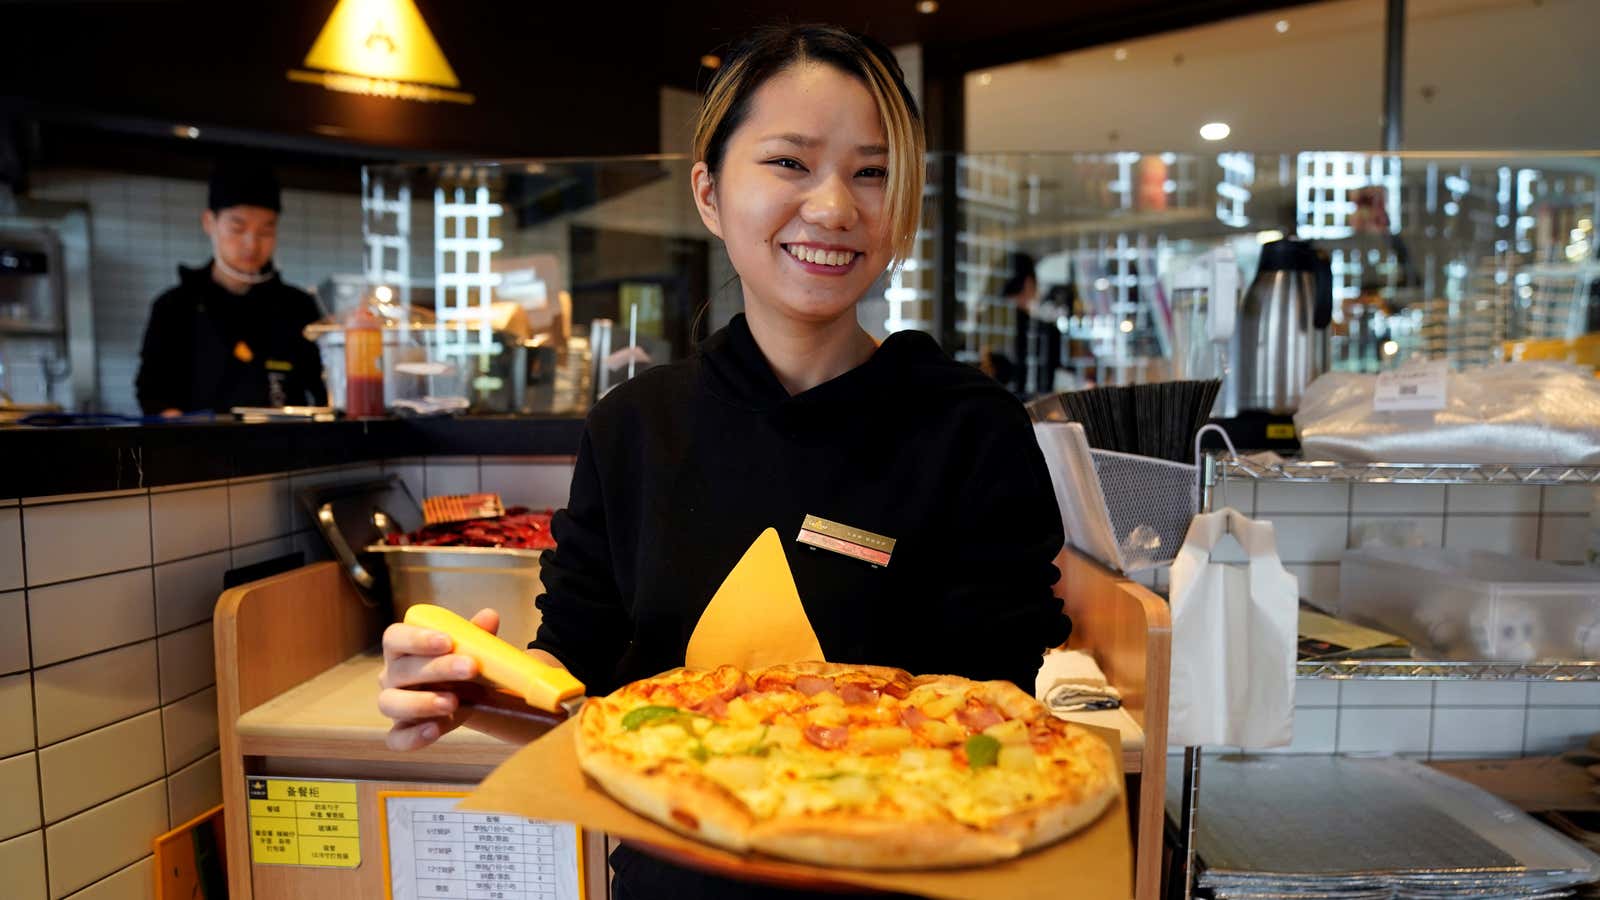 Pizza is one of Italy’s cuisine exports to China.